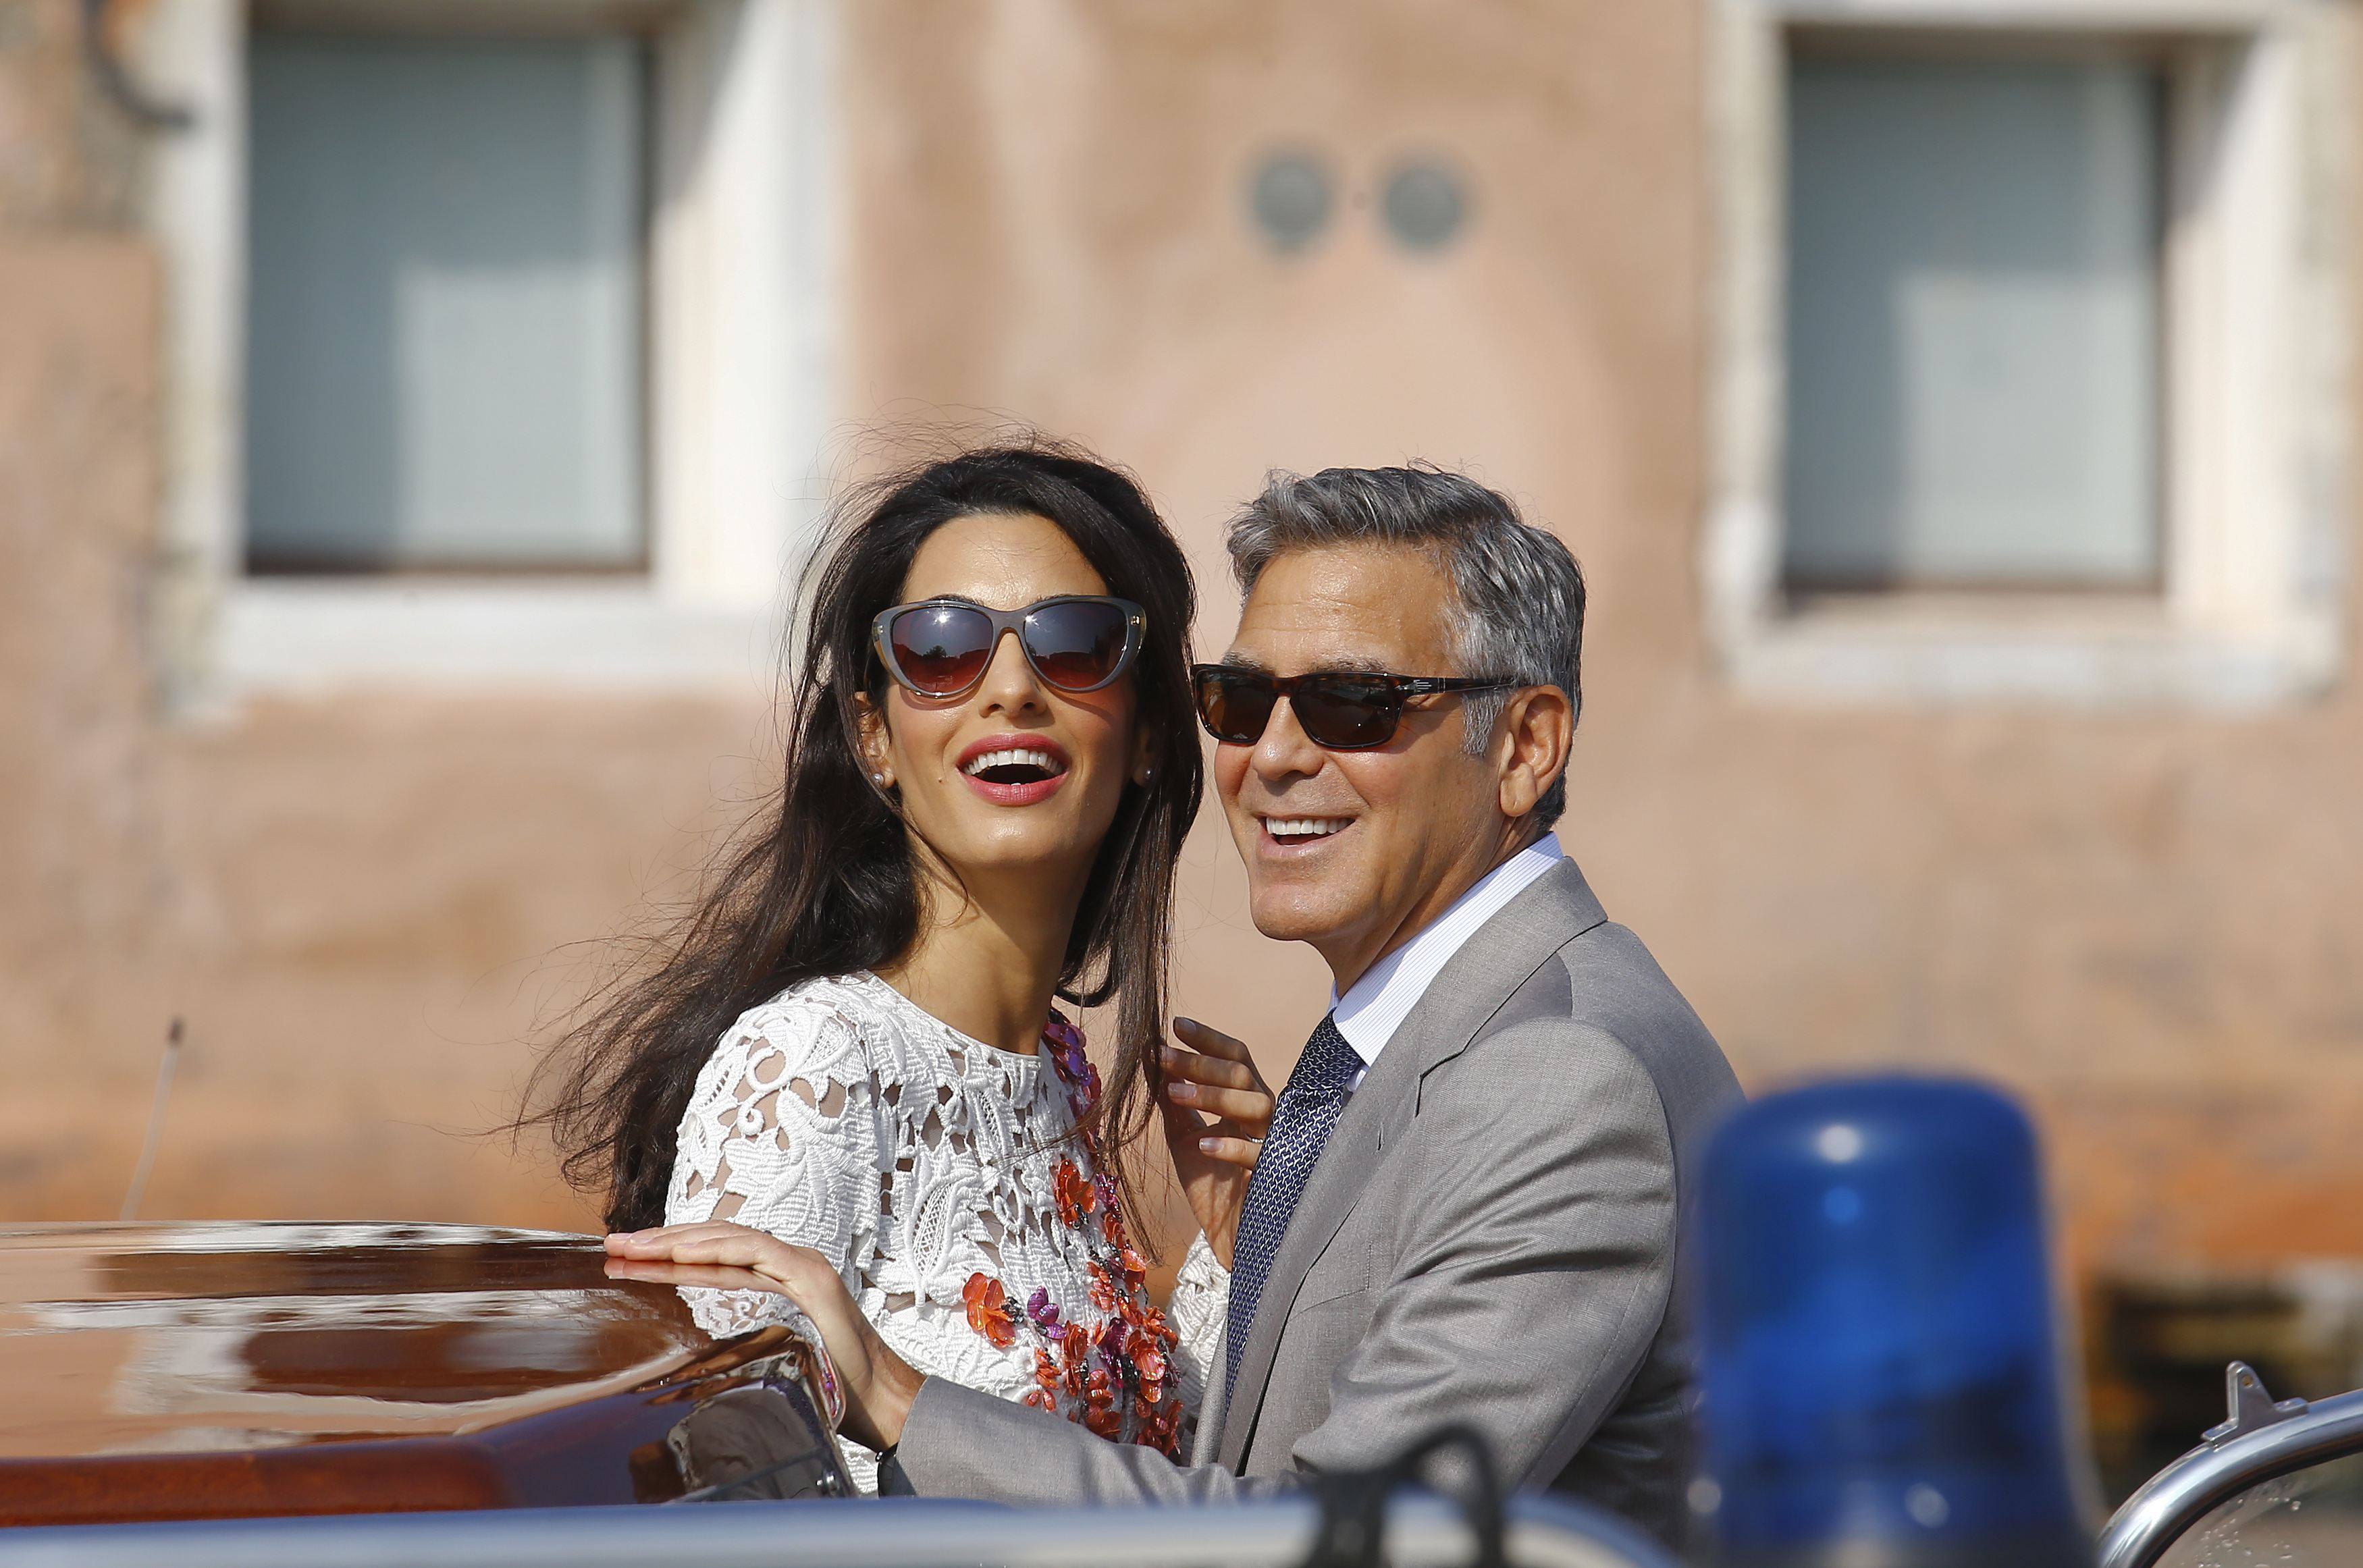 U.S. actor George Clooney and his wife Amal Alamuddin stand in a water taxi on the Grand Canal in Venice in this September 28, 2014 file photo. REUTERS/Stefano Rellandini/Files (ITALY - Tags: TPX IMAGES OF THE DAY ENTERTAINMENT)